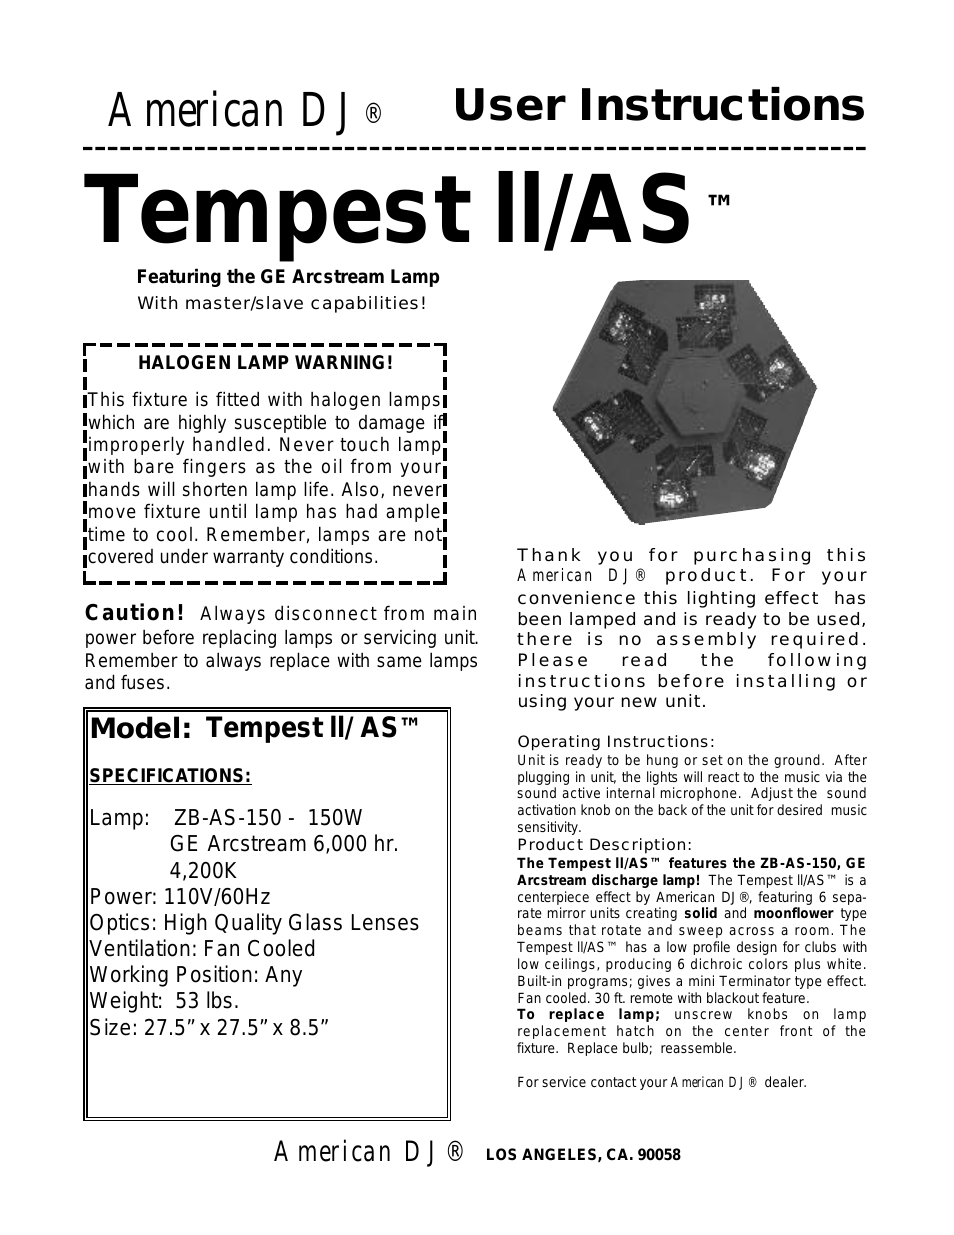 Tempest II/AS